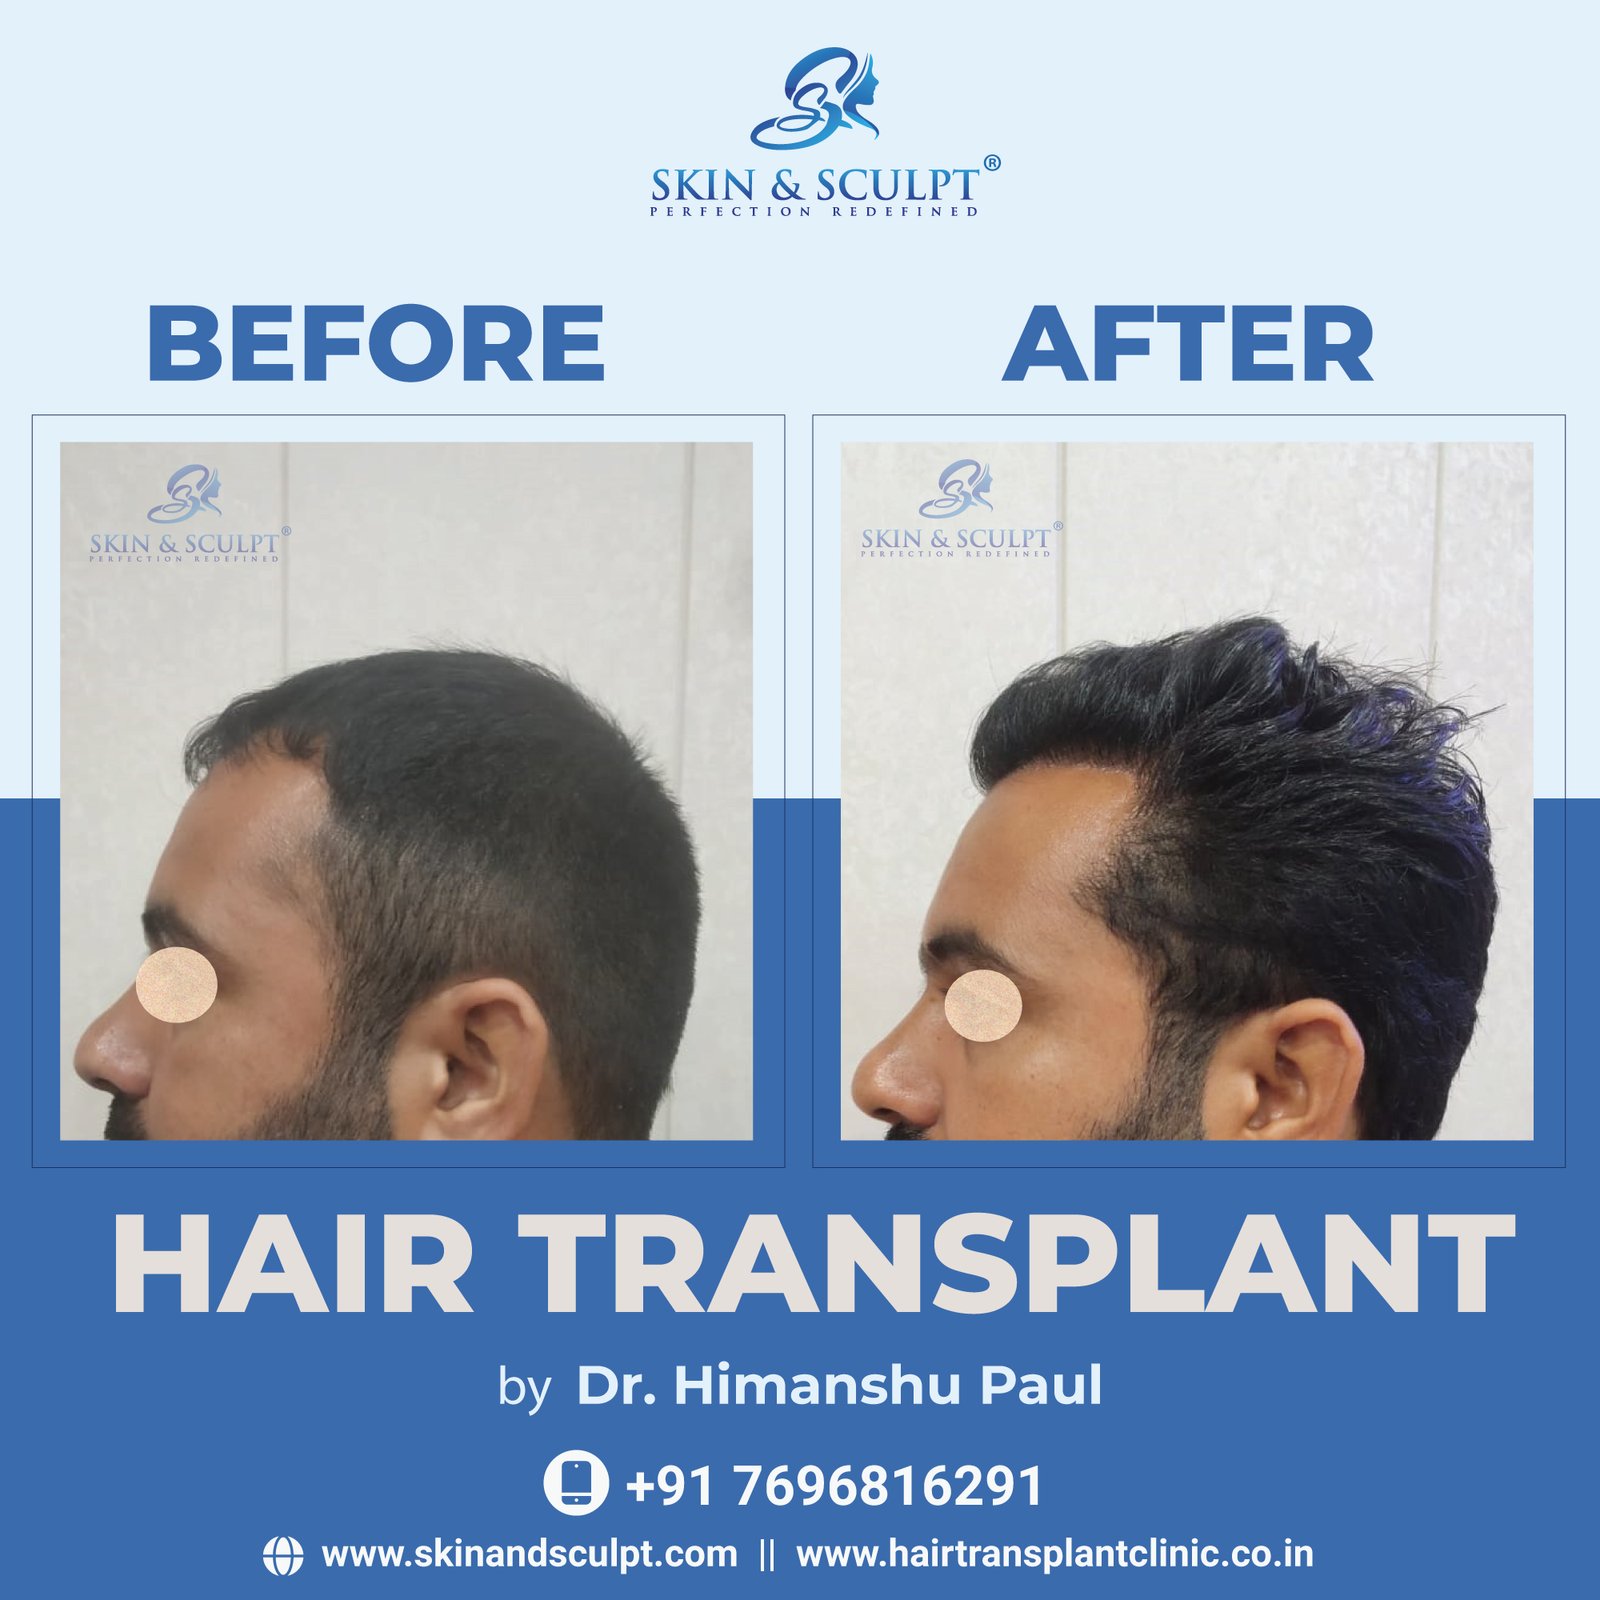 Hair Transplant In Chandigarh By Dr. Himanshu Paul (Skin and Sculpt)